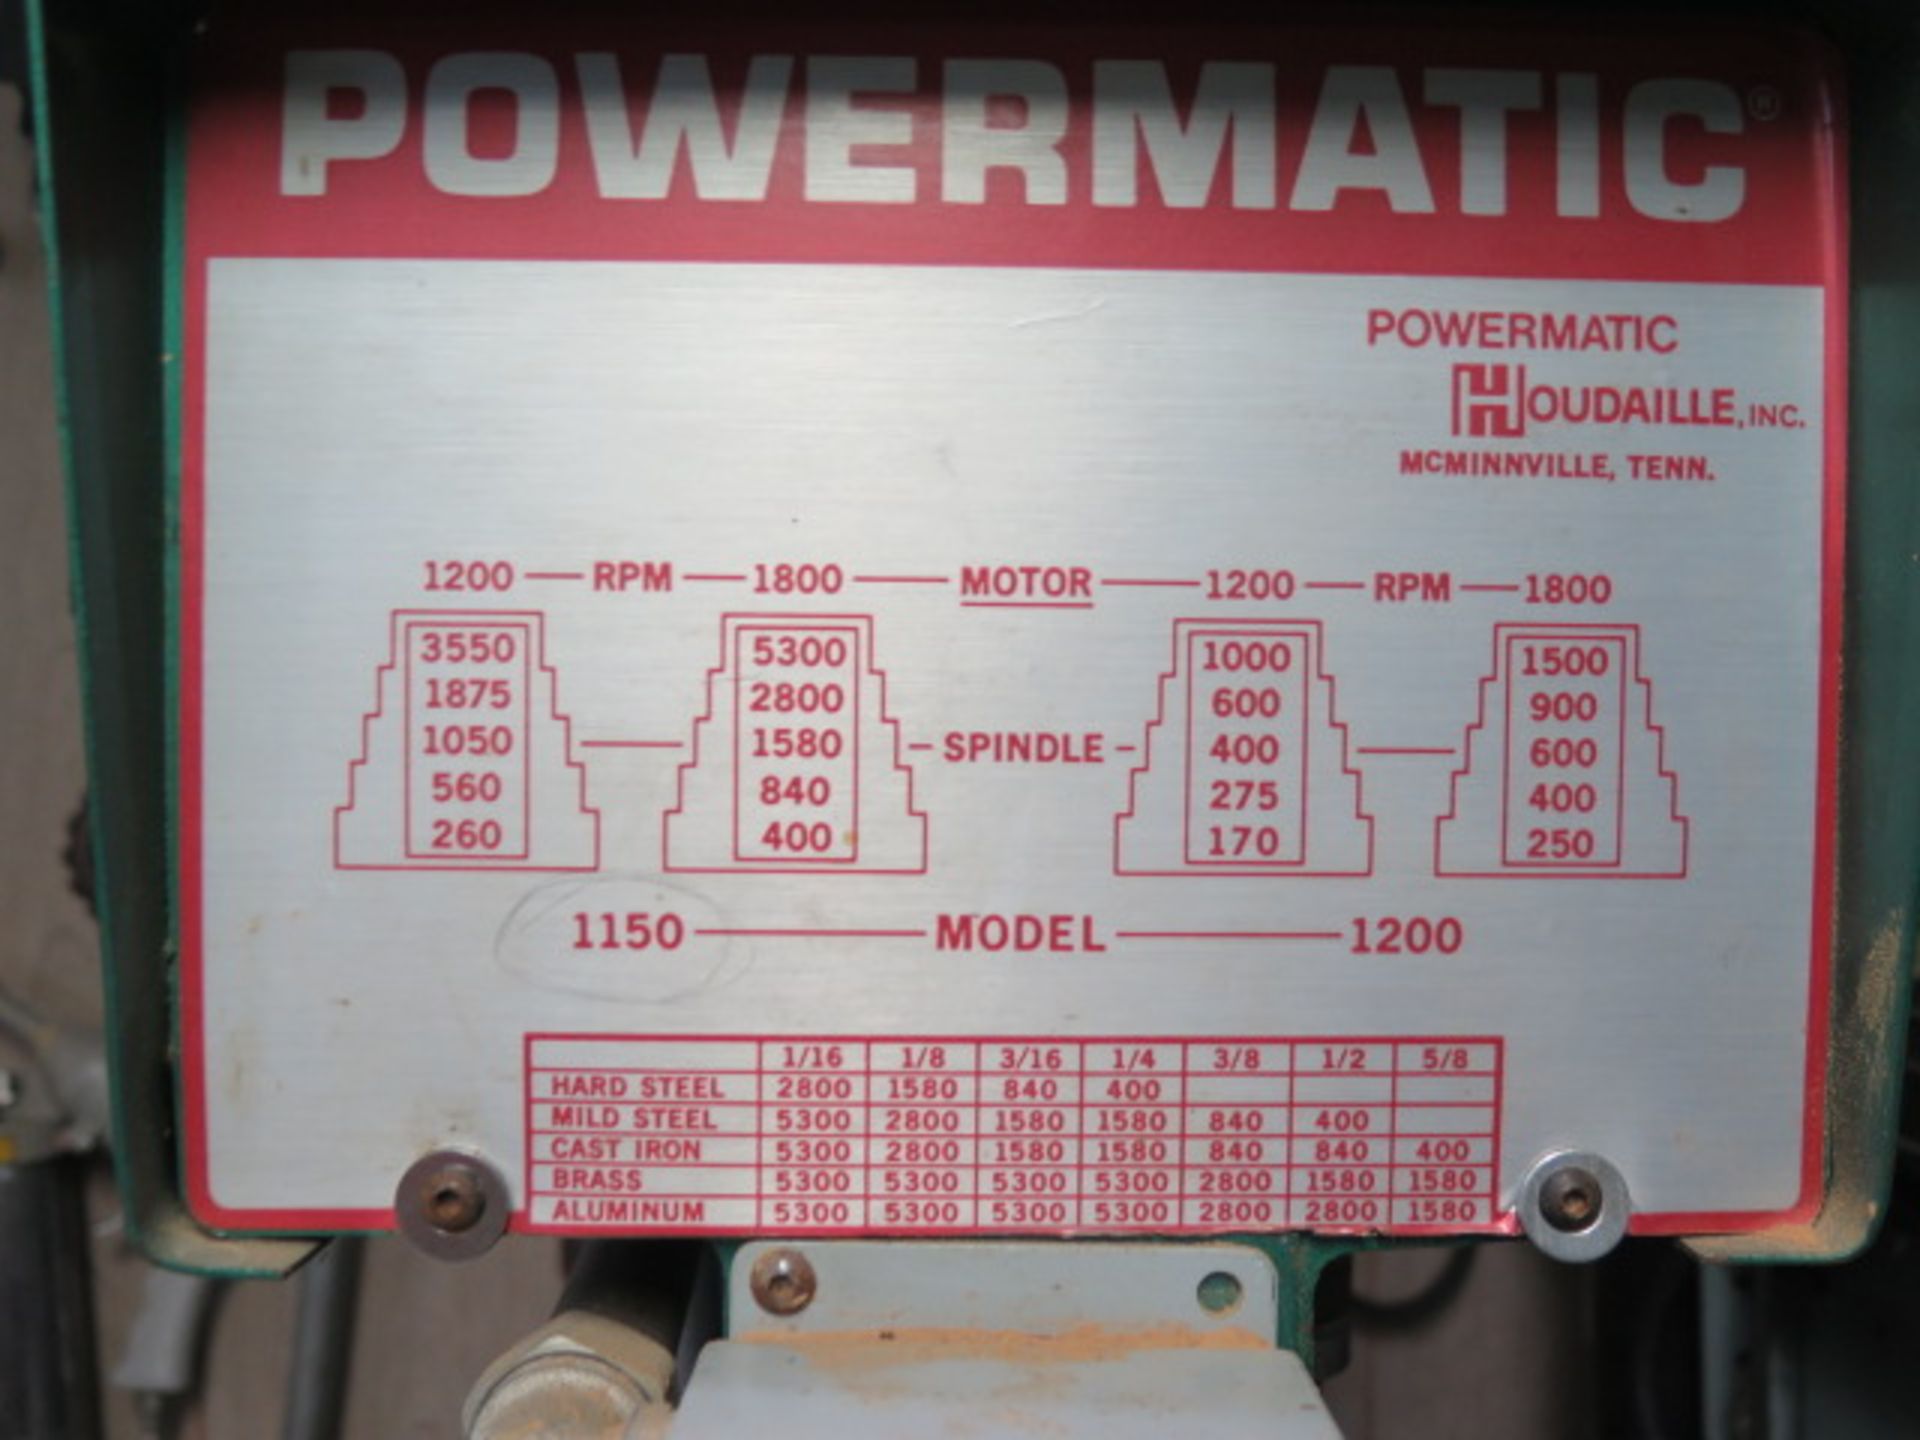 Powermatic mdl. 1150A Pedestal Drill Press (SOLD AS-IS - NO WARRANTY) - Image 3 of 6